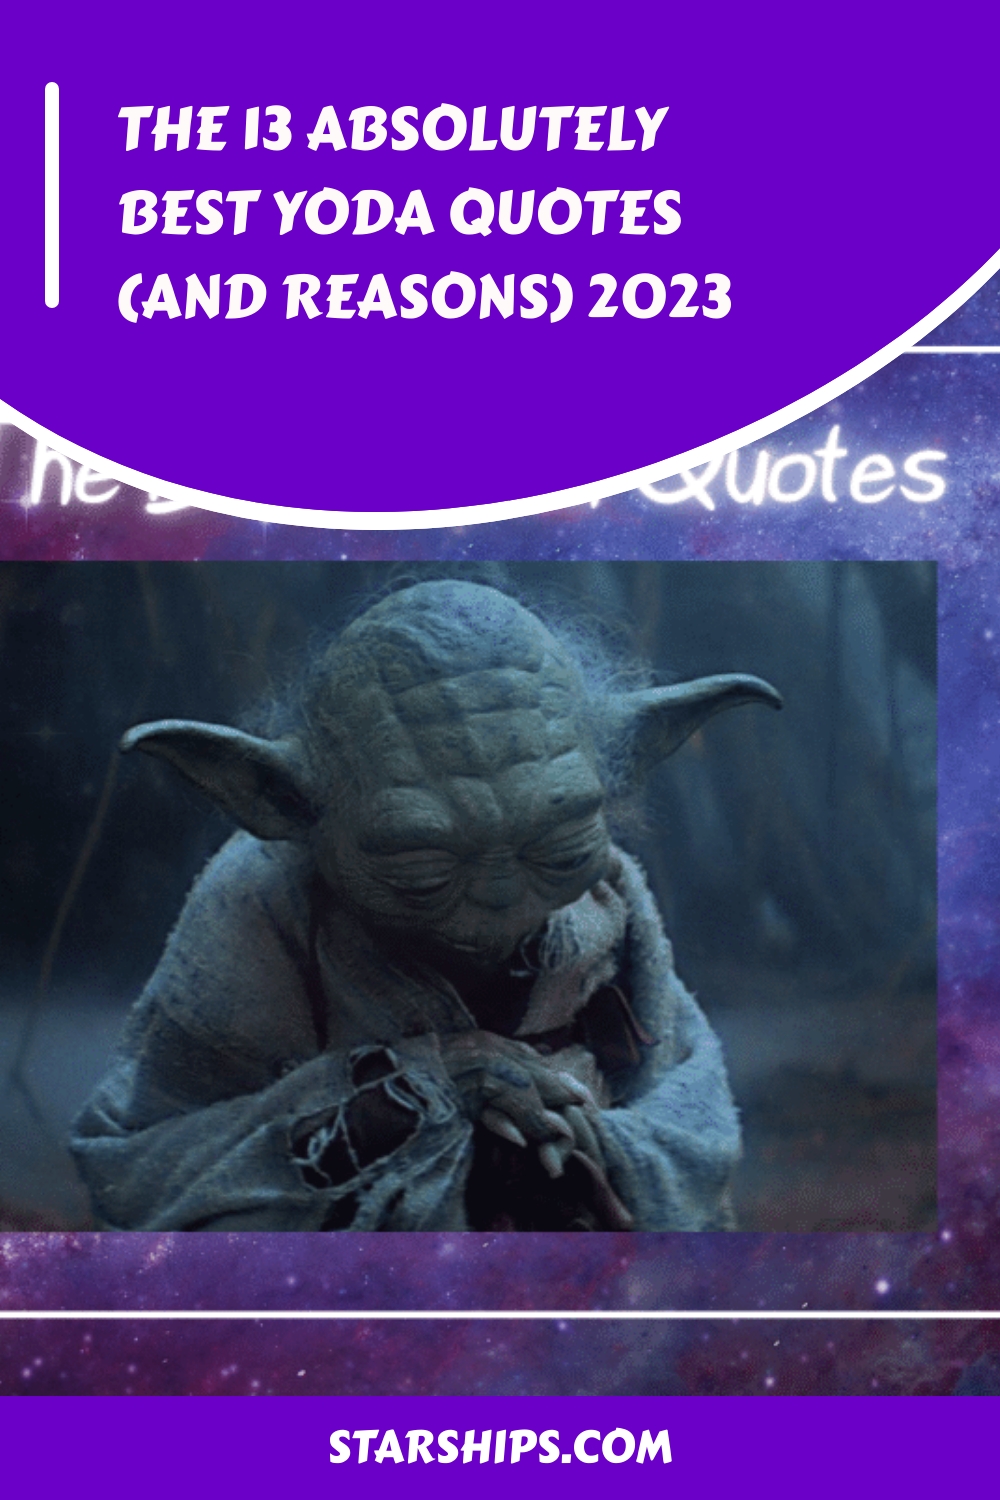 The 13 Absolutely Best Yoda Quotes and Reasons 2023 generated pin 56096